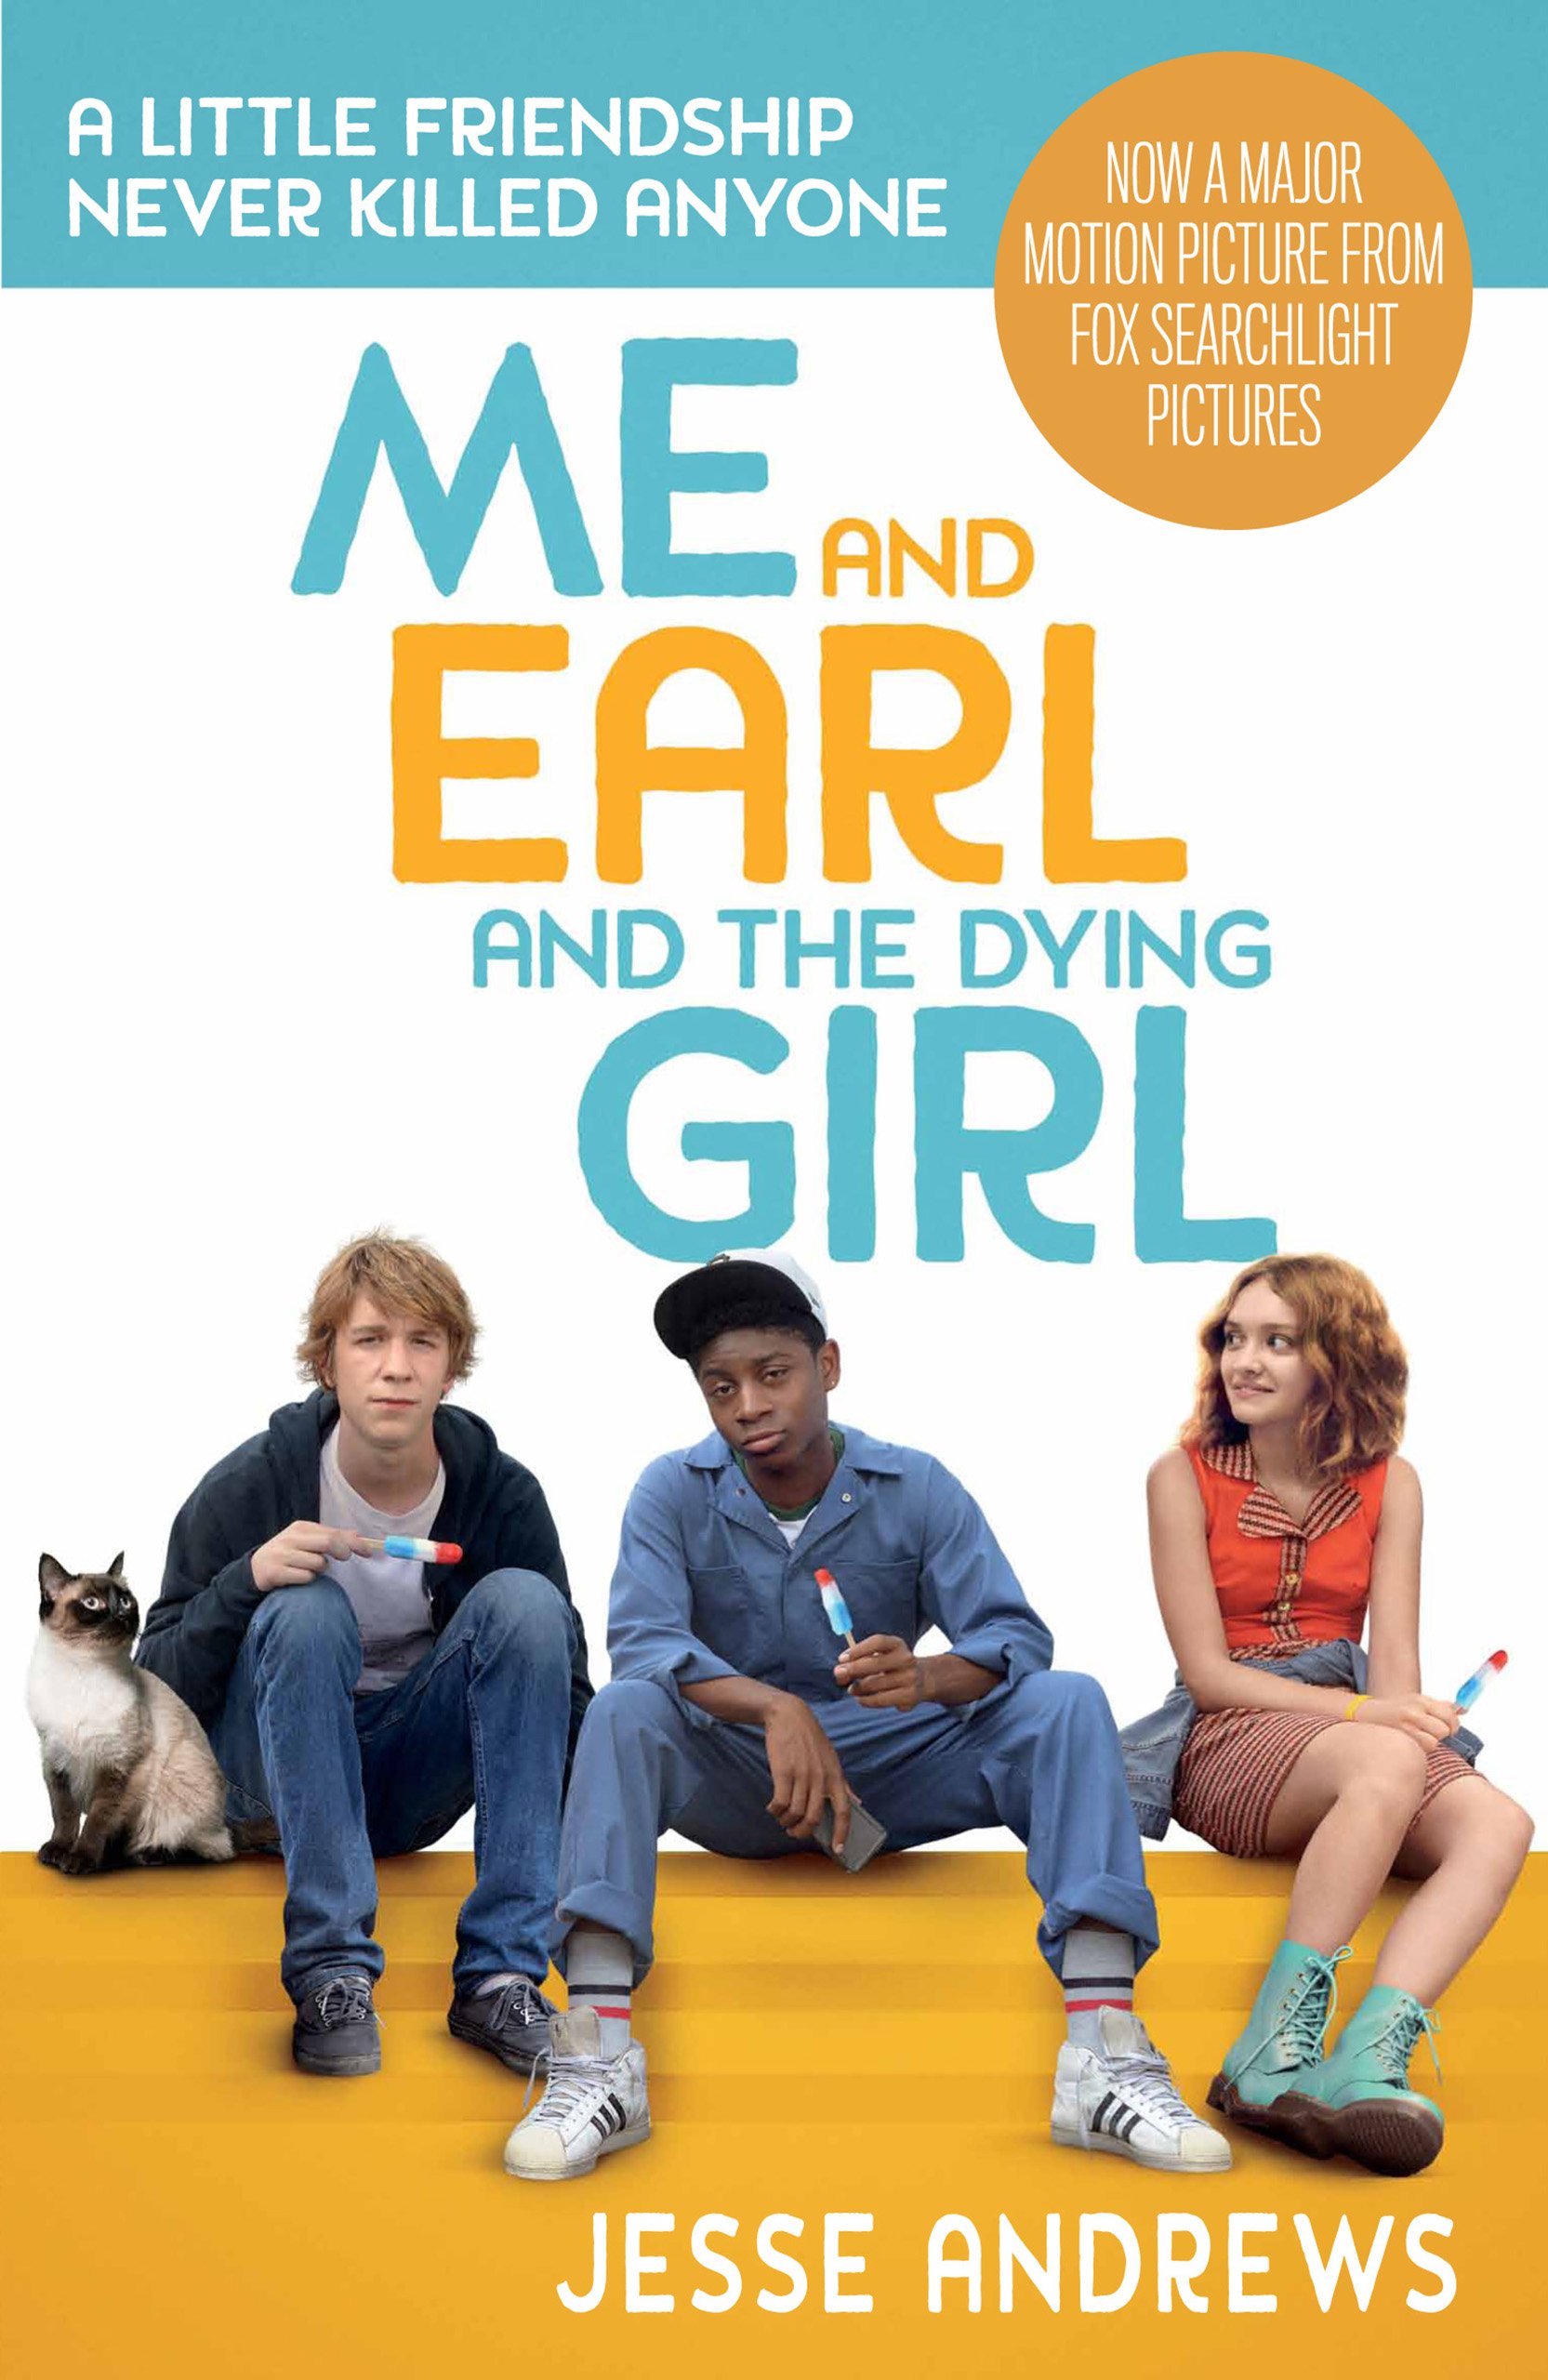 212-me_and_earl_and_the_dying_girl_book.jpg